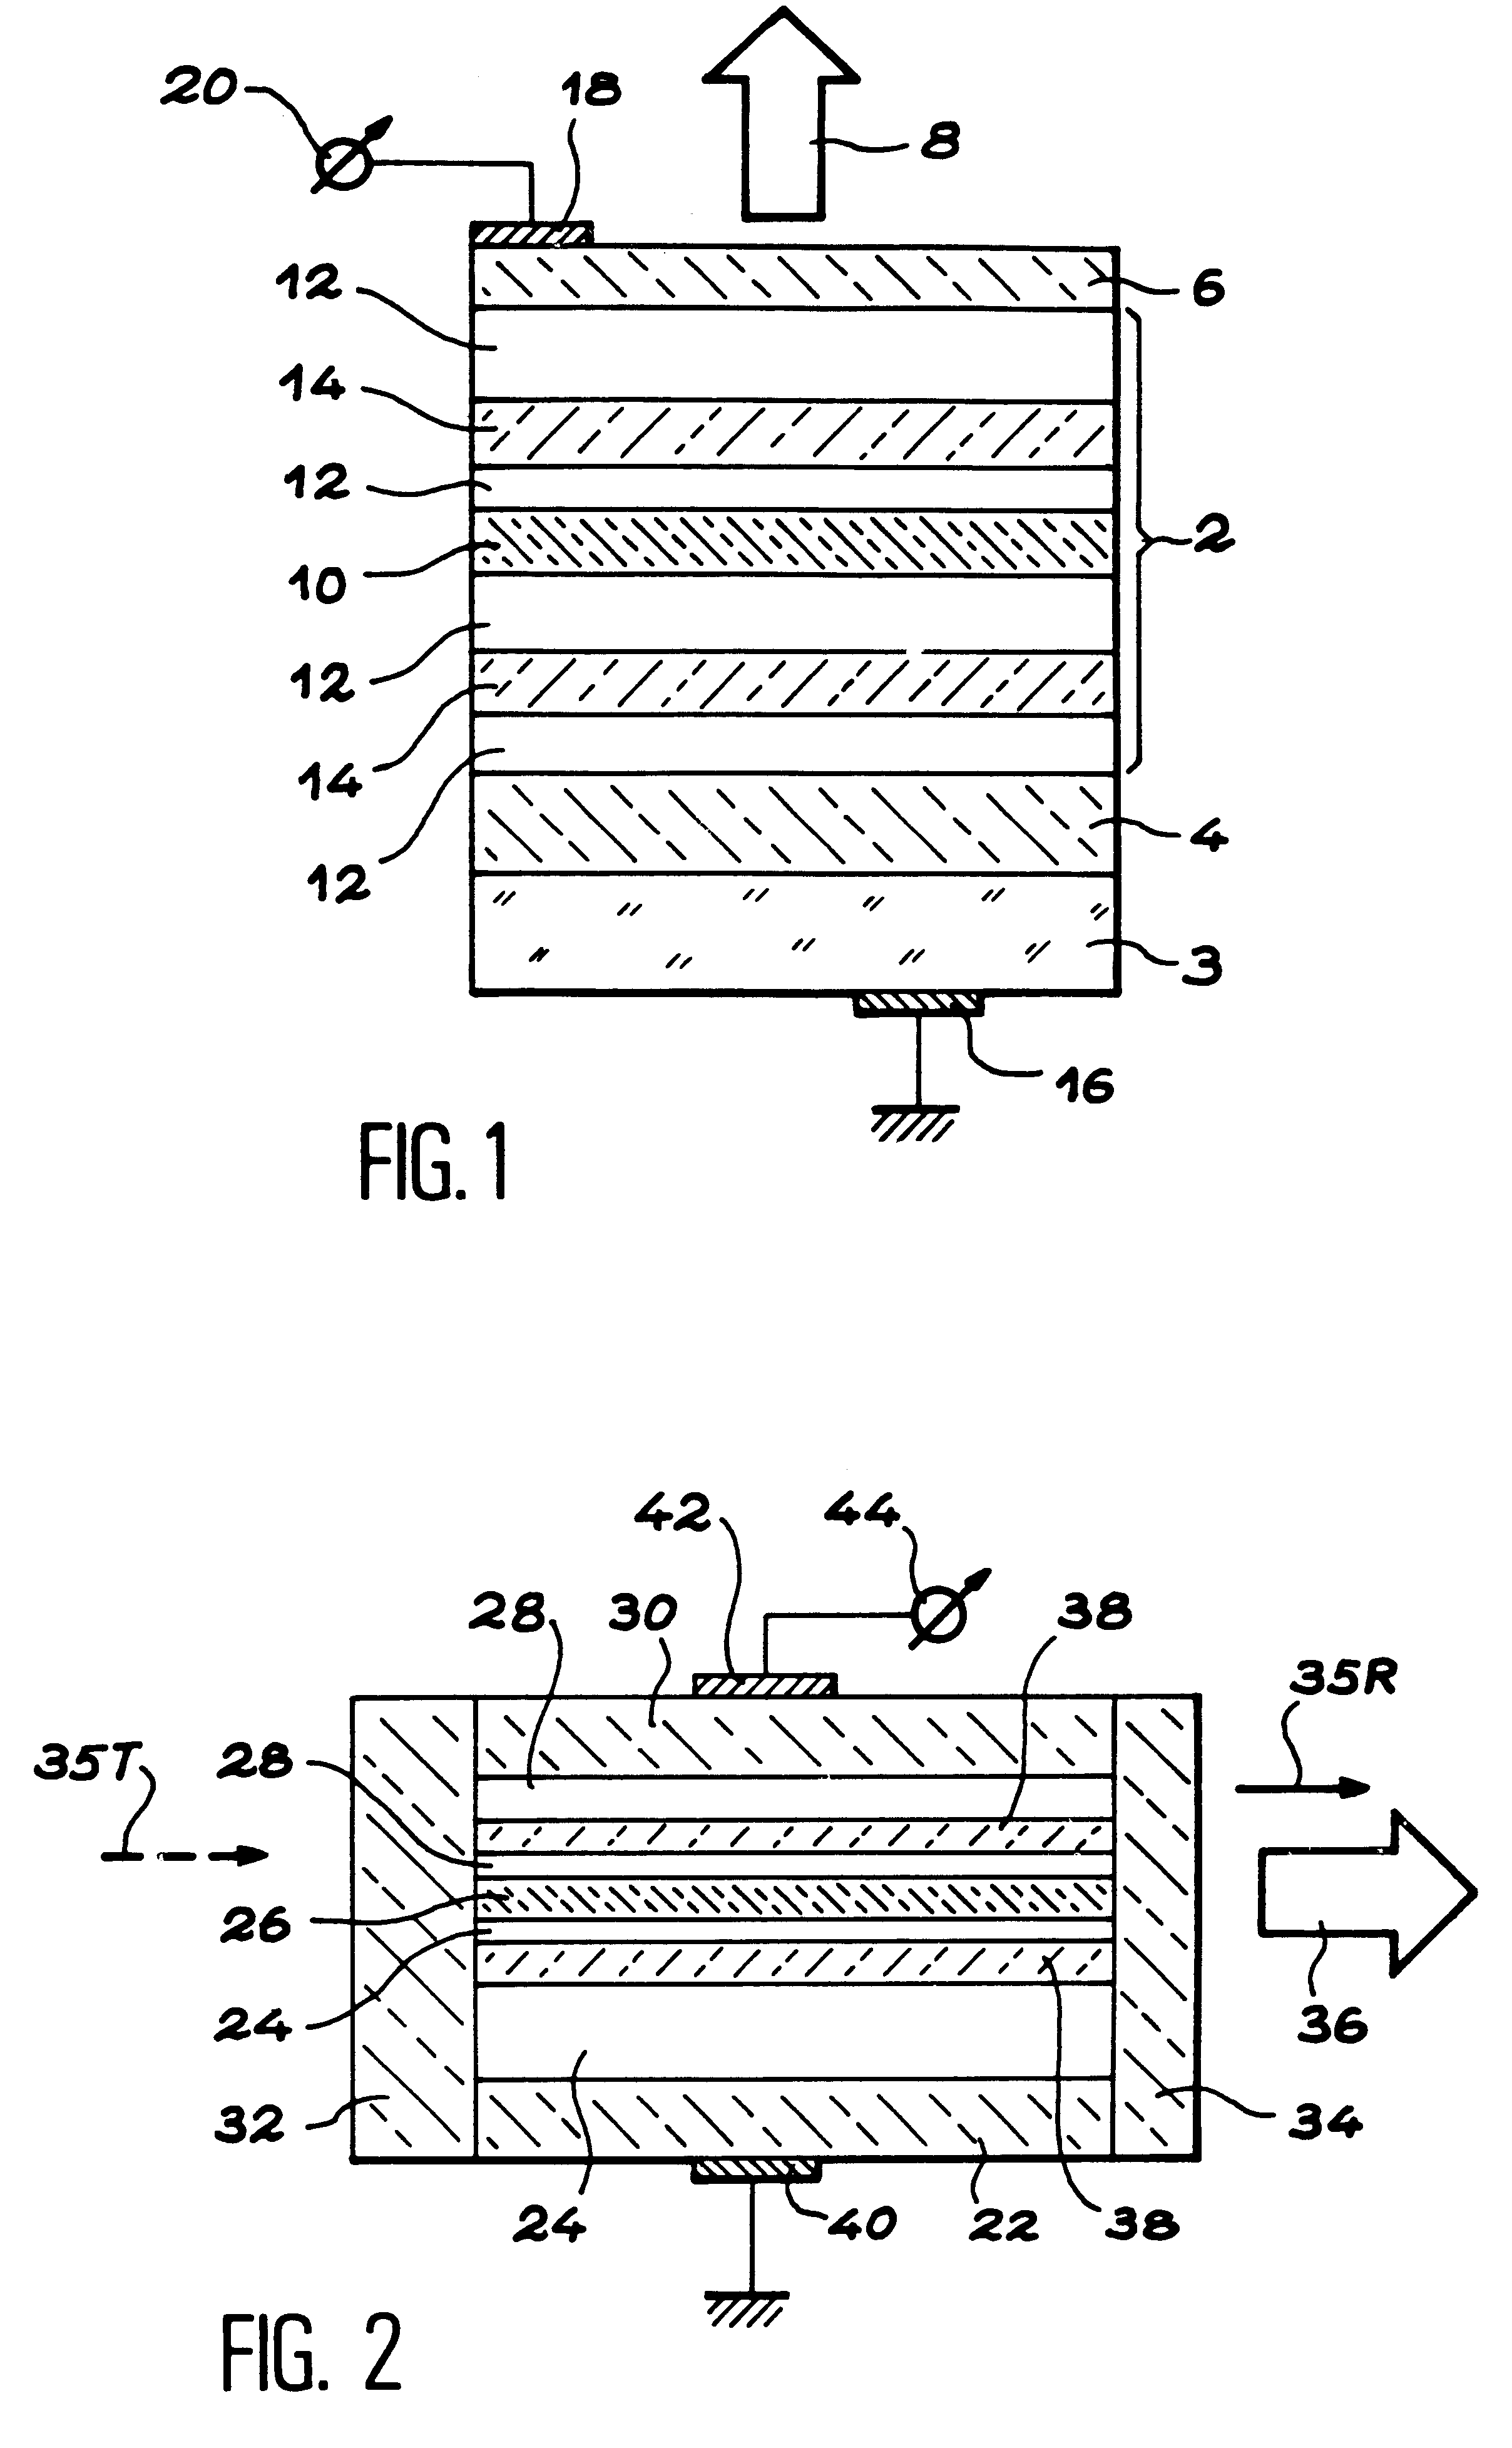 Optical semiconductor device with resonant cavity tunable in wavelength, application to modulation of light intensity